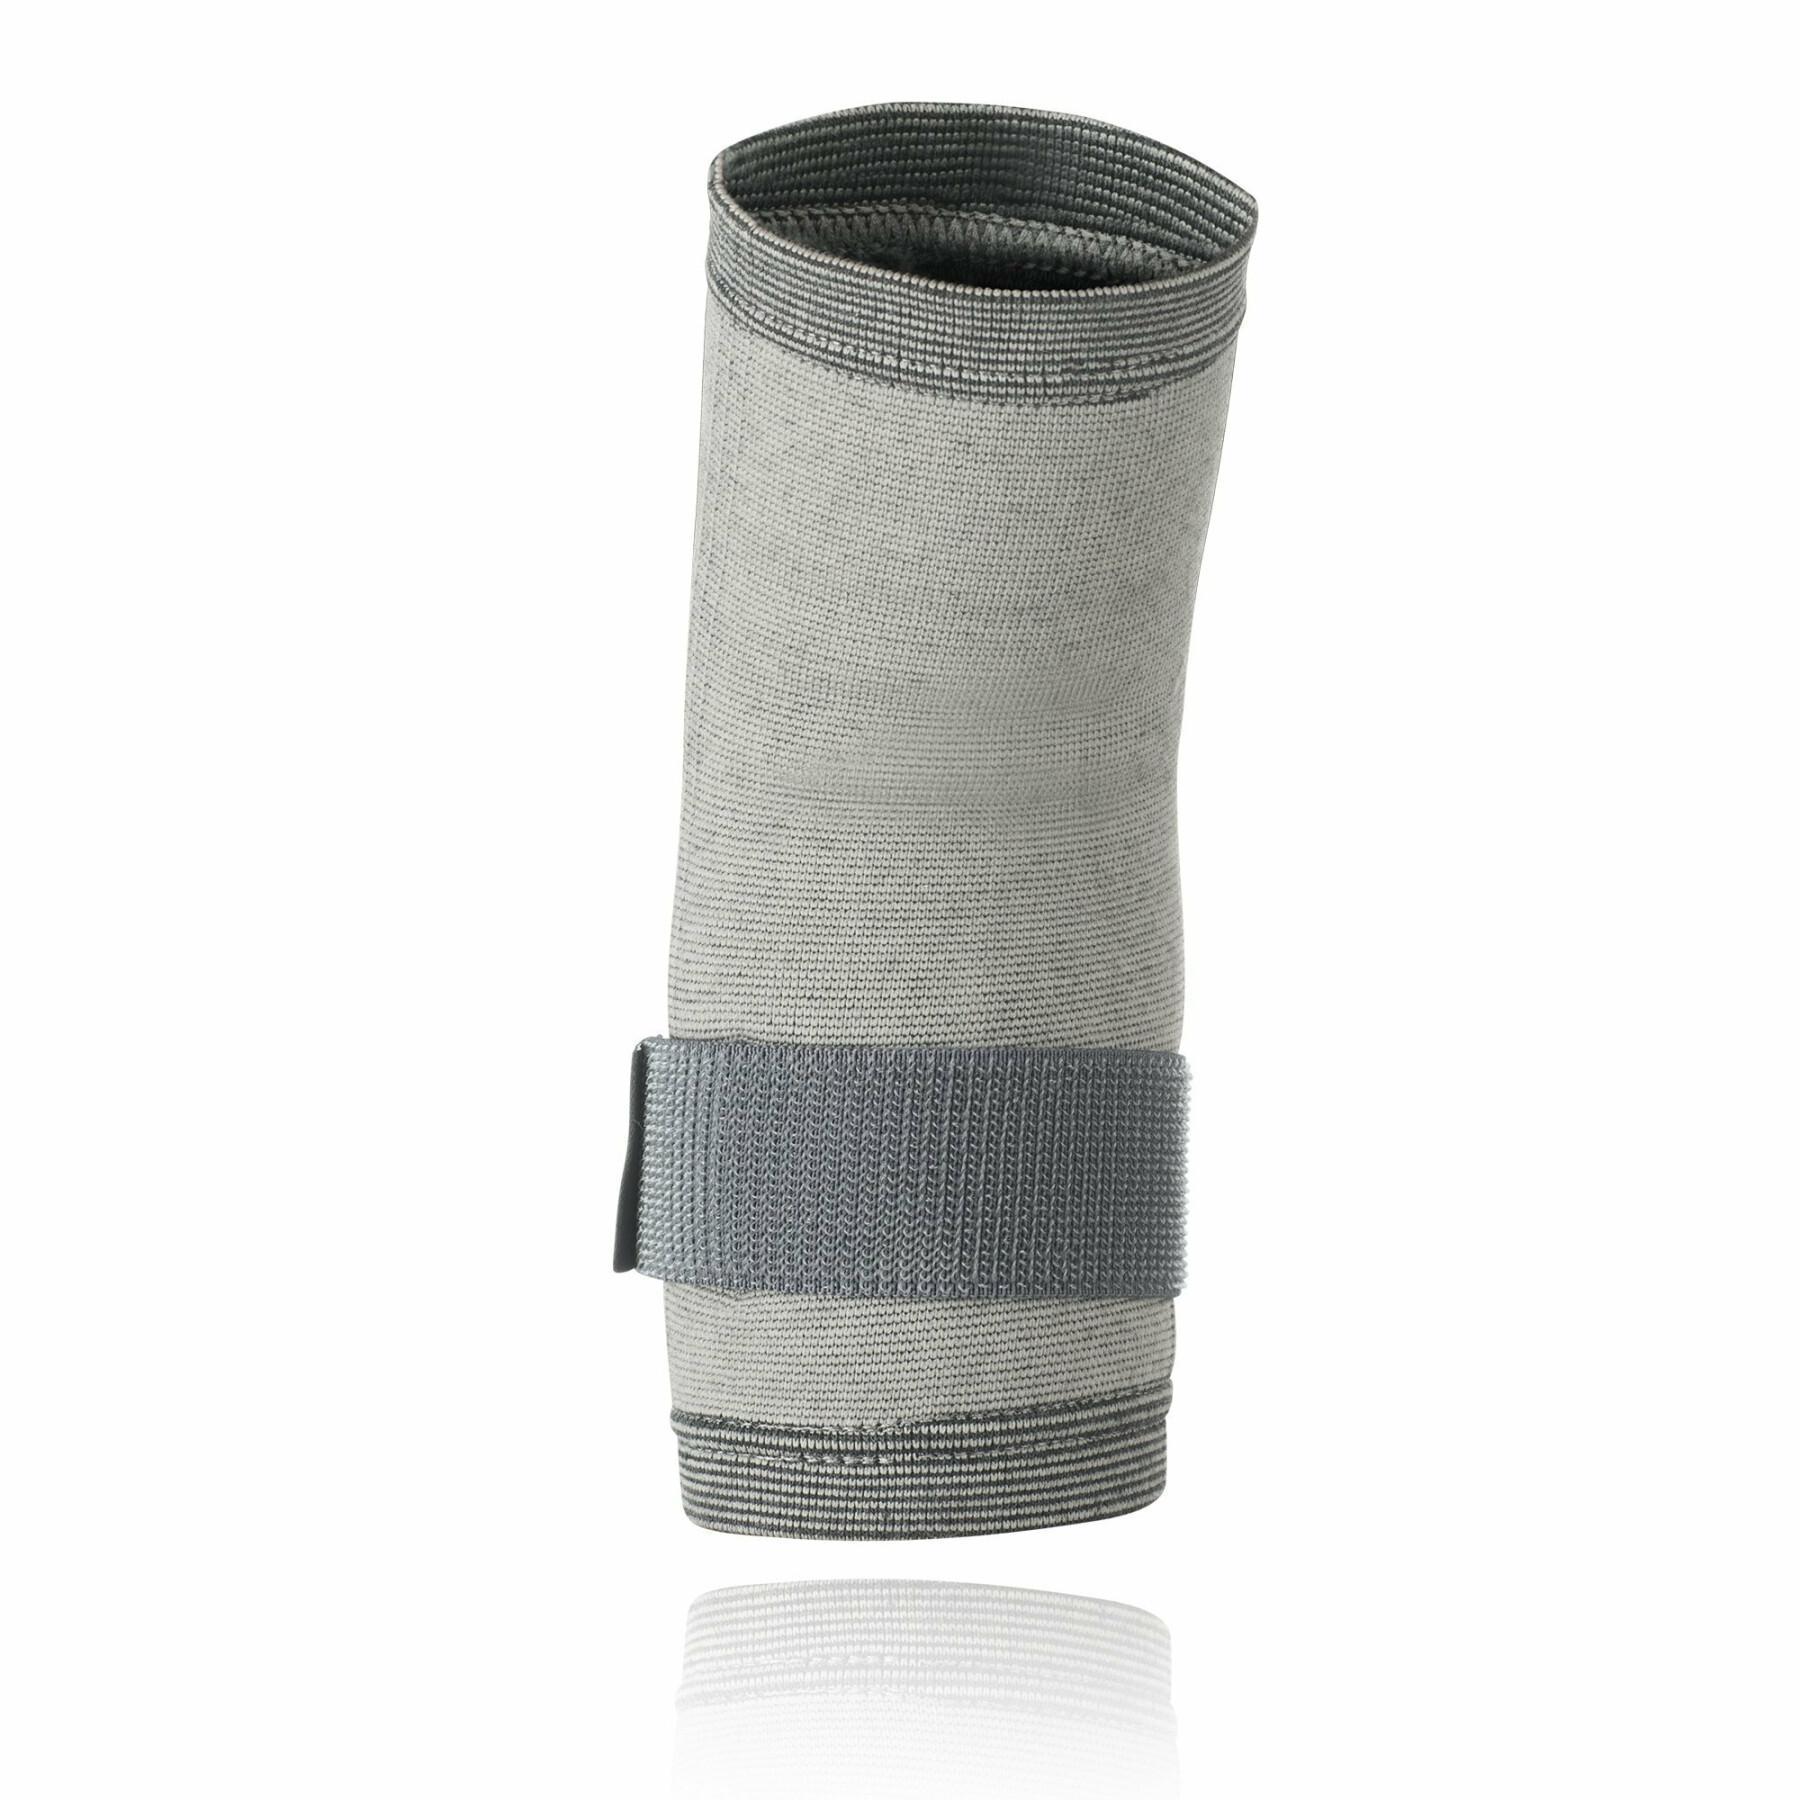 Knitted elbow pads Rehband Qd line